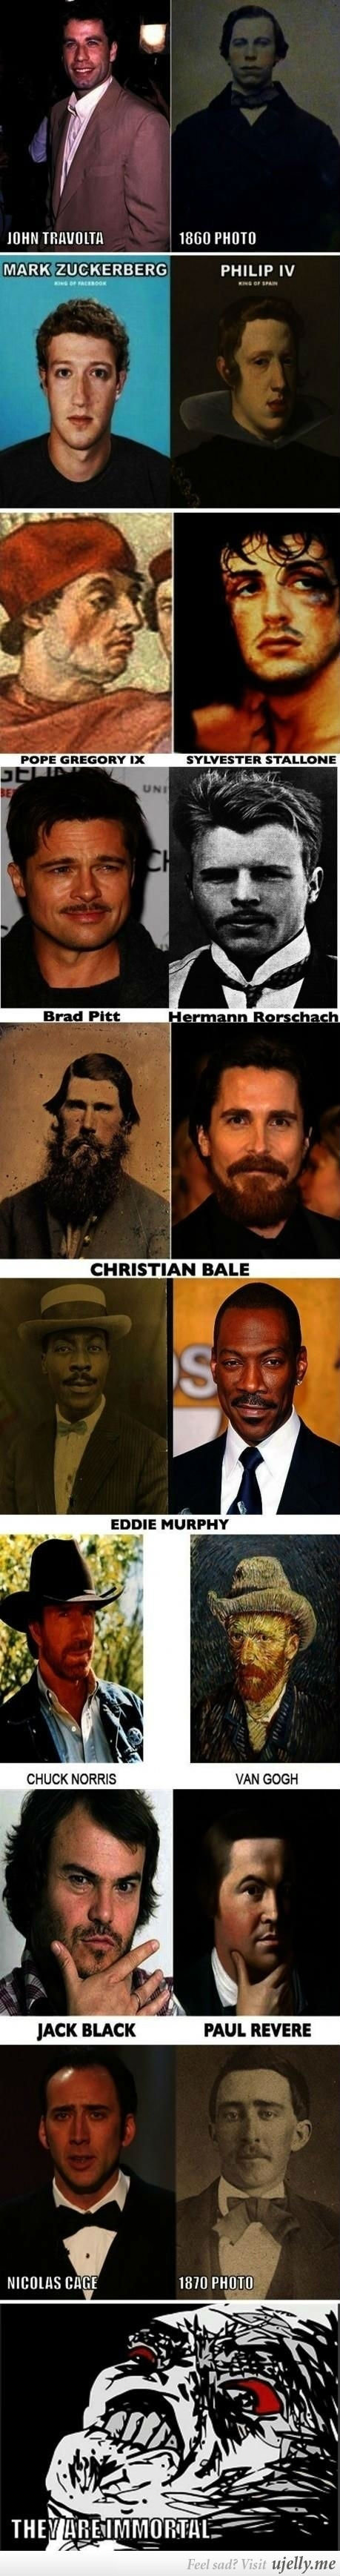 THEY ARE IMMORTAL. found on u jelly pretty sure its not a repost. JOHN " MARK ZUCKERBERG PHILIP IV PEPE - SYLVESTER CHRISTIAN BALE as g JACK ELISE .iiw. ltl. RE